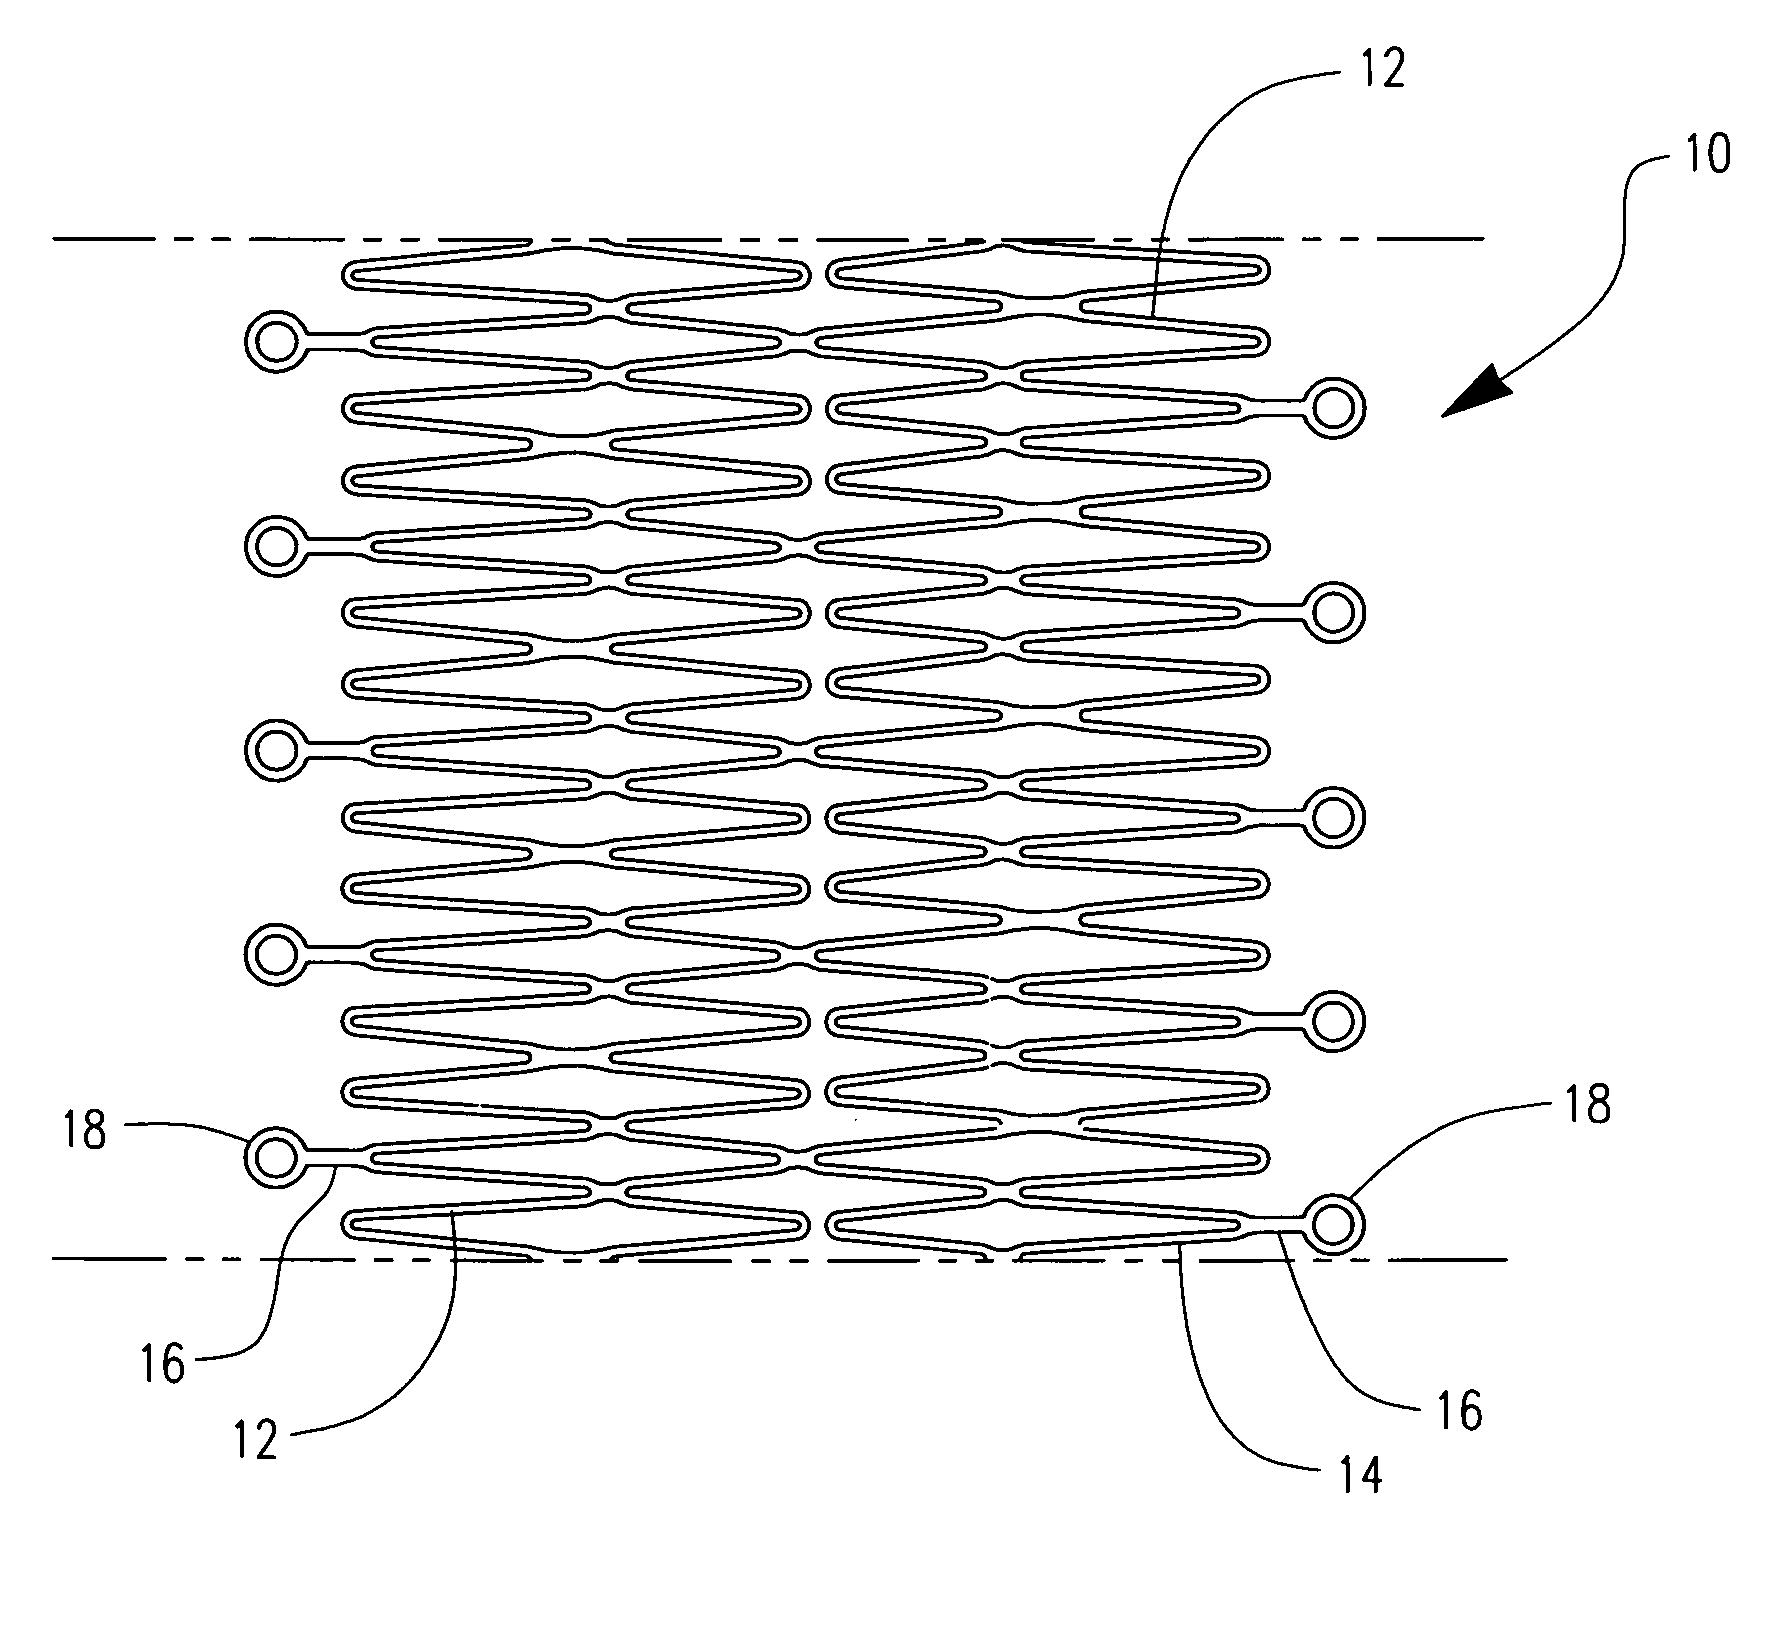 Process method for attaching radio opaque markers to shape memory stent